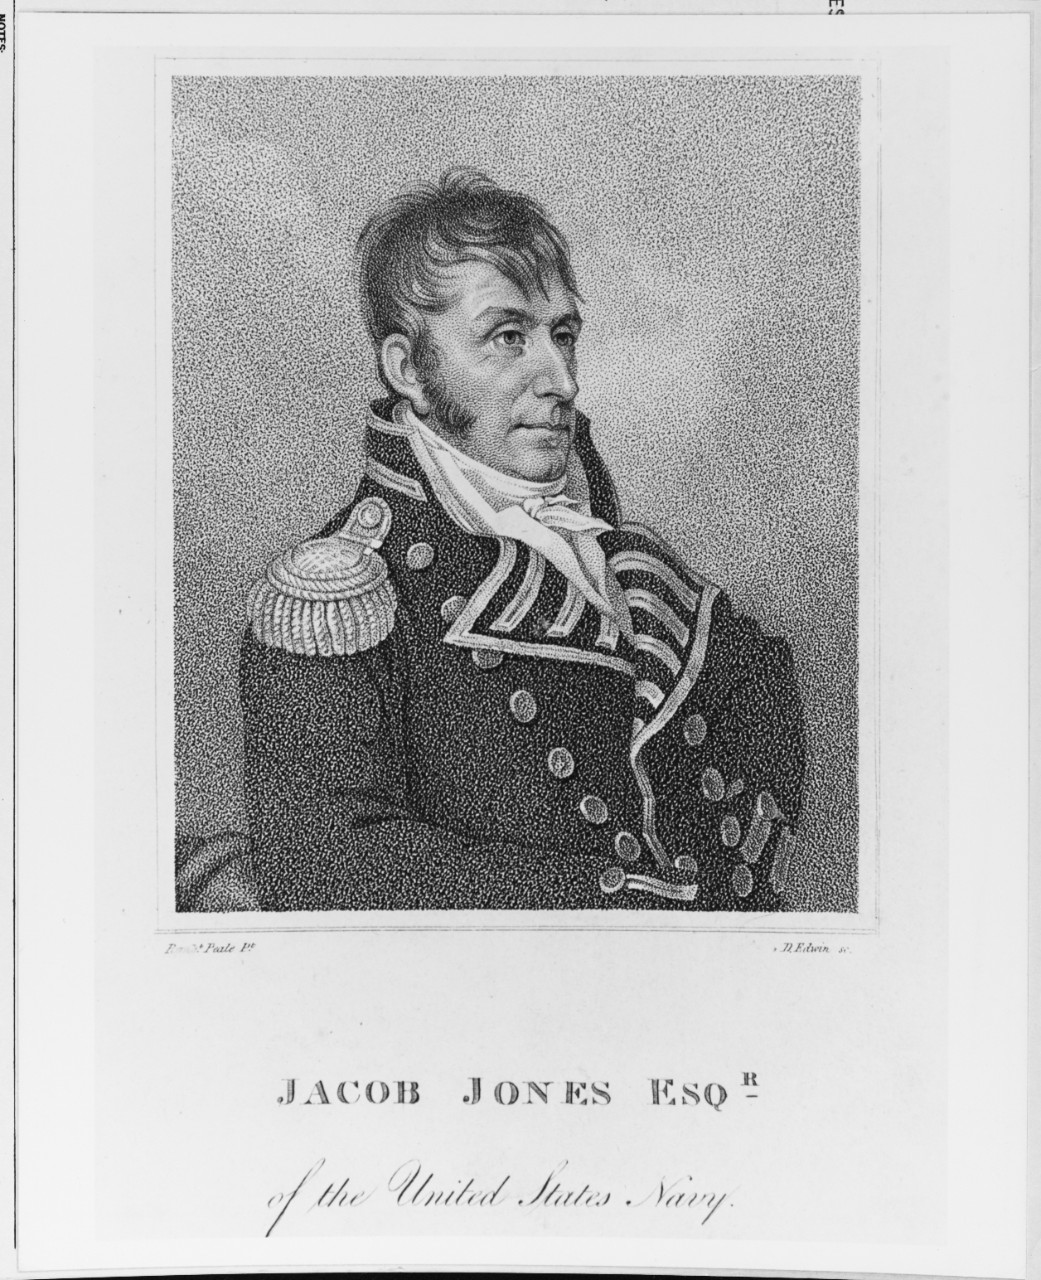 Engraving of Capt. Jacob Jones, USN, by D. Edwin, after the portrait by Rembrandt Peale. (Naval History and Heritage Command Photograph NH 63713)